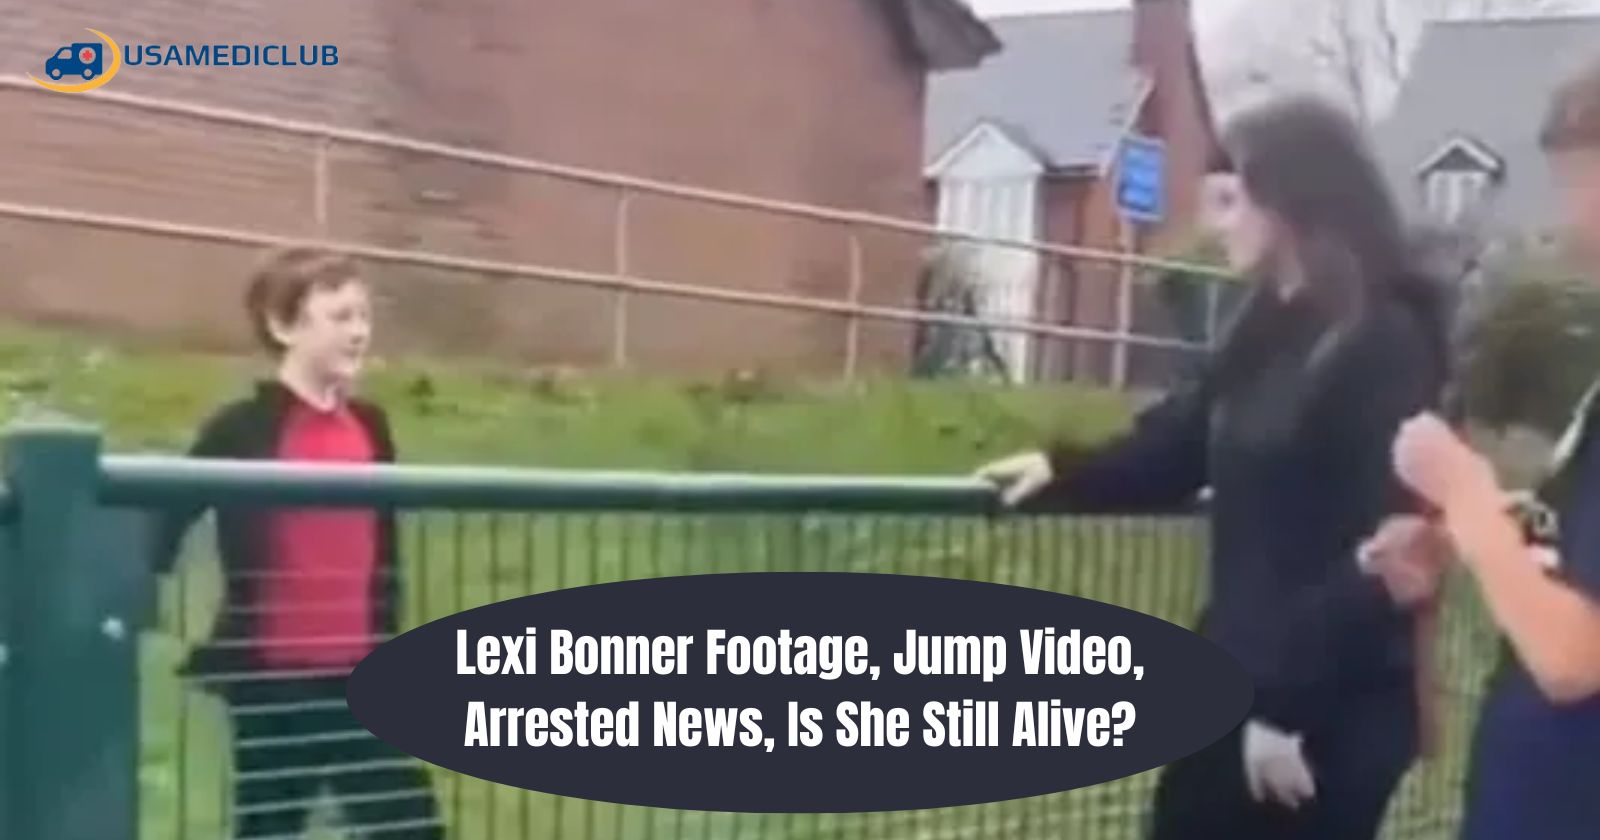 Lexi Bonner Footage, Jump Video, Arrested News, Is She Still Alive?